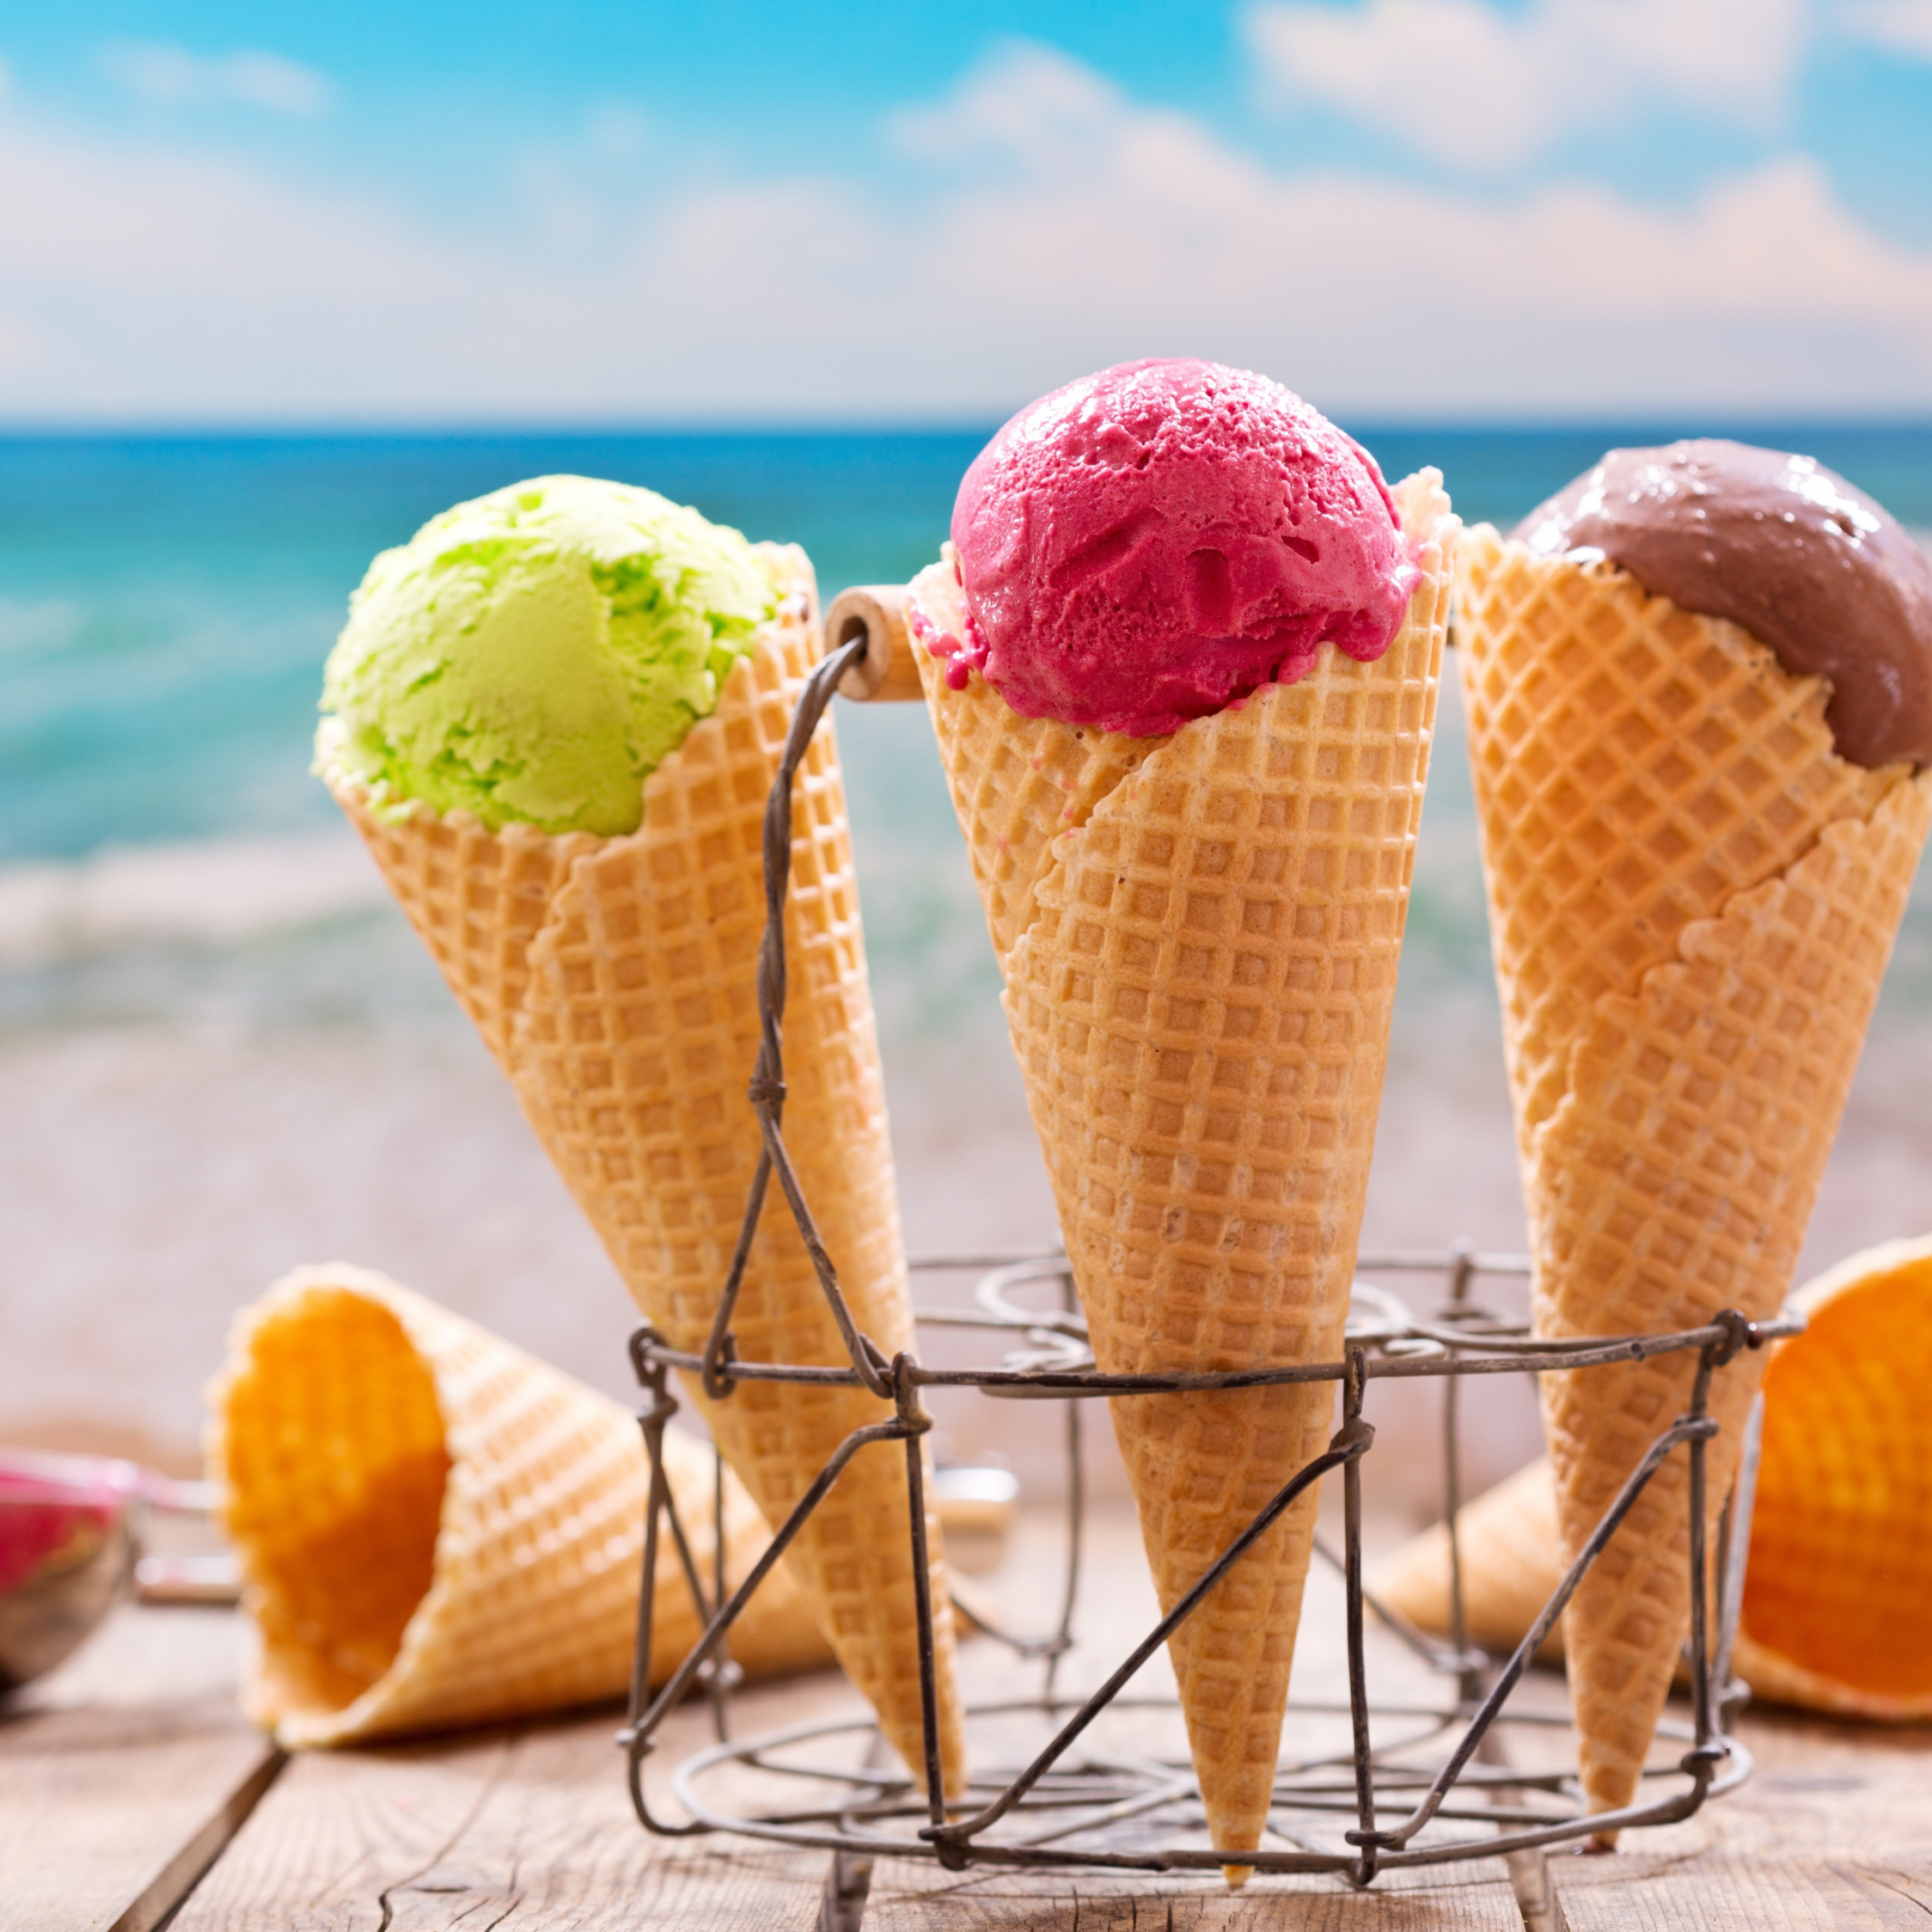 Download 2248x2248 Wallpaper Ice Cream Waffle Cones Summer Ipad Air Ipad Air 2 Ipad 3 Ipad 4 Ipad Mini 2 Ipad Mini 3 2248x2248 Hd Image Background 5114